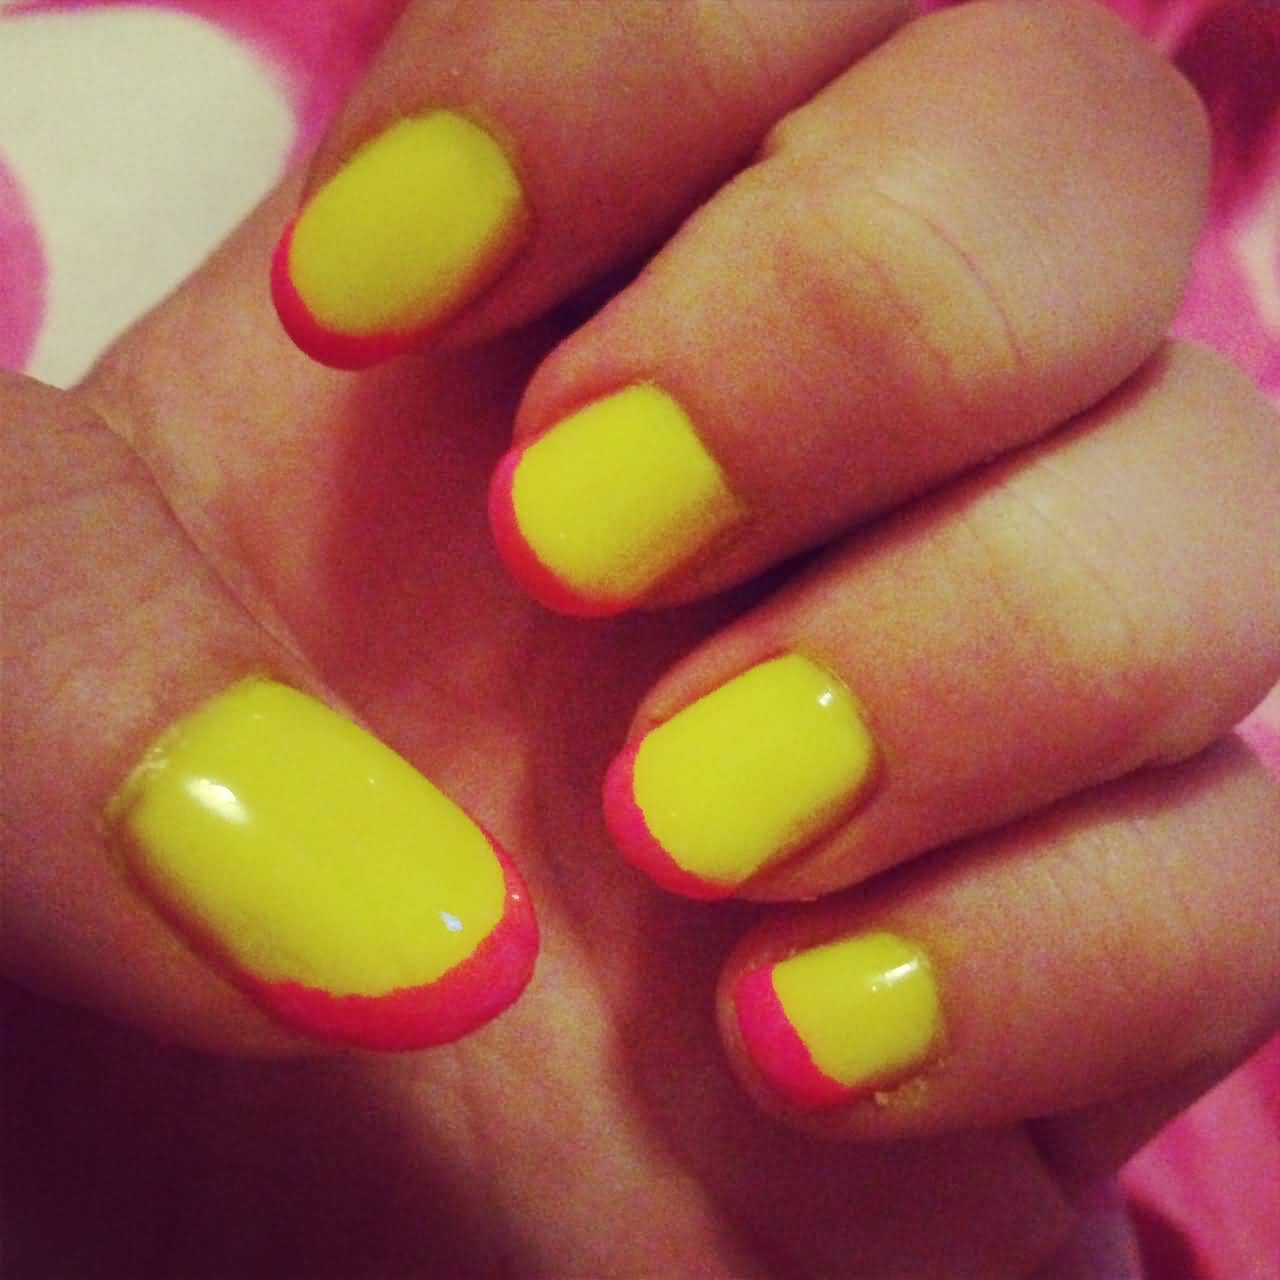 Neon Yellow And Pink Tip Nail Art Design